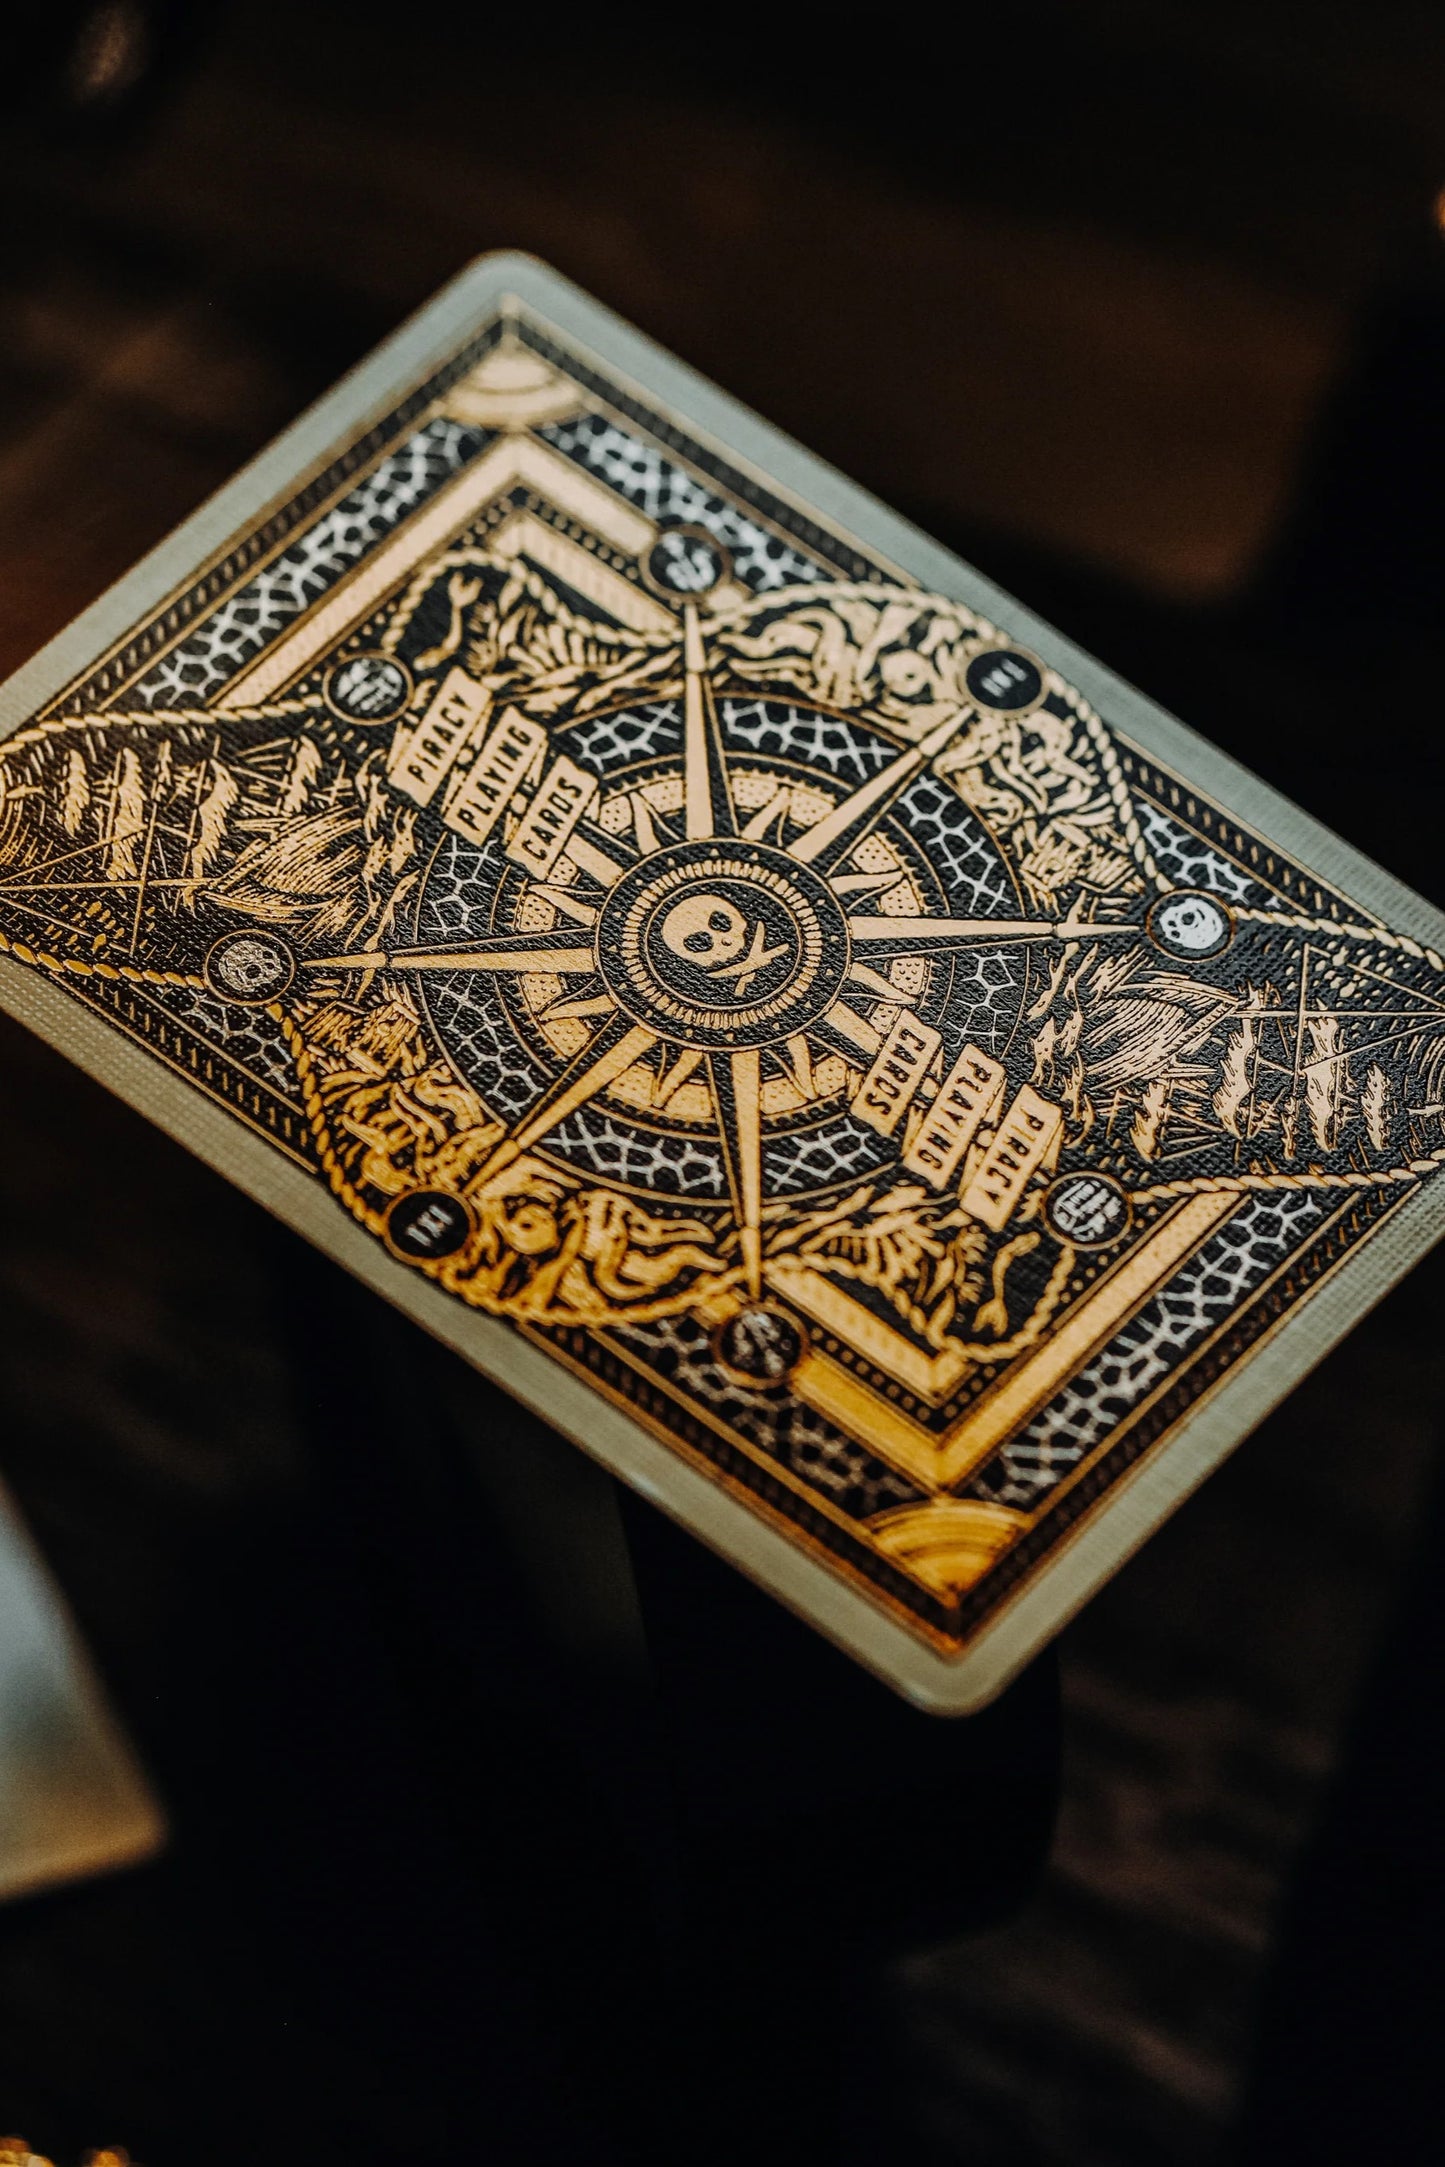 Theory 11 Playing Cards // Piracy